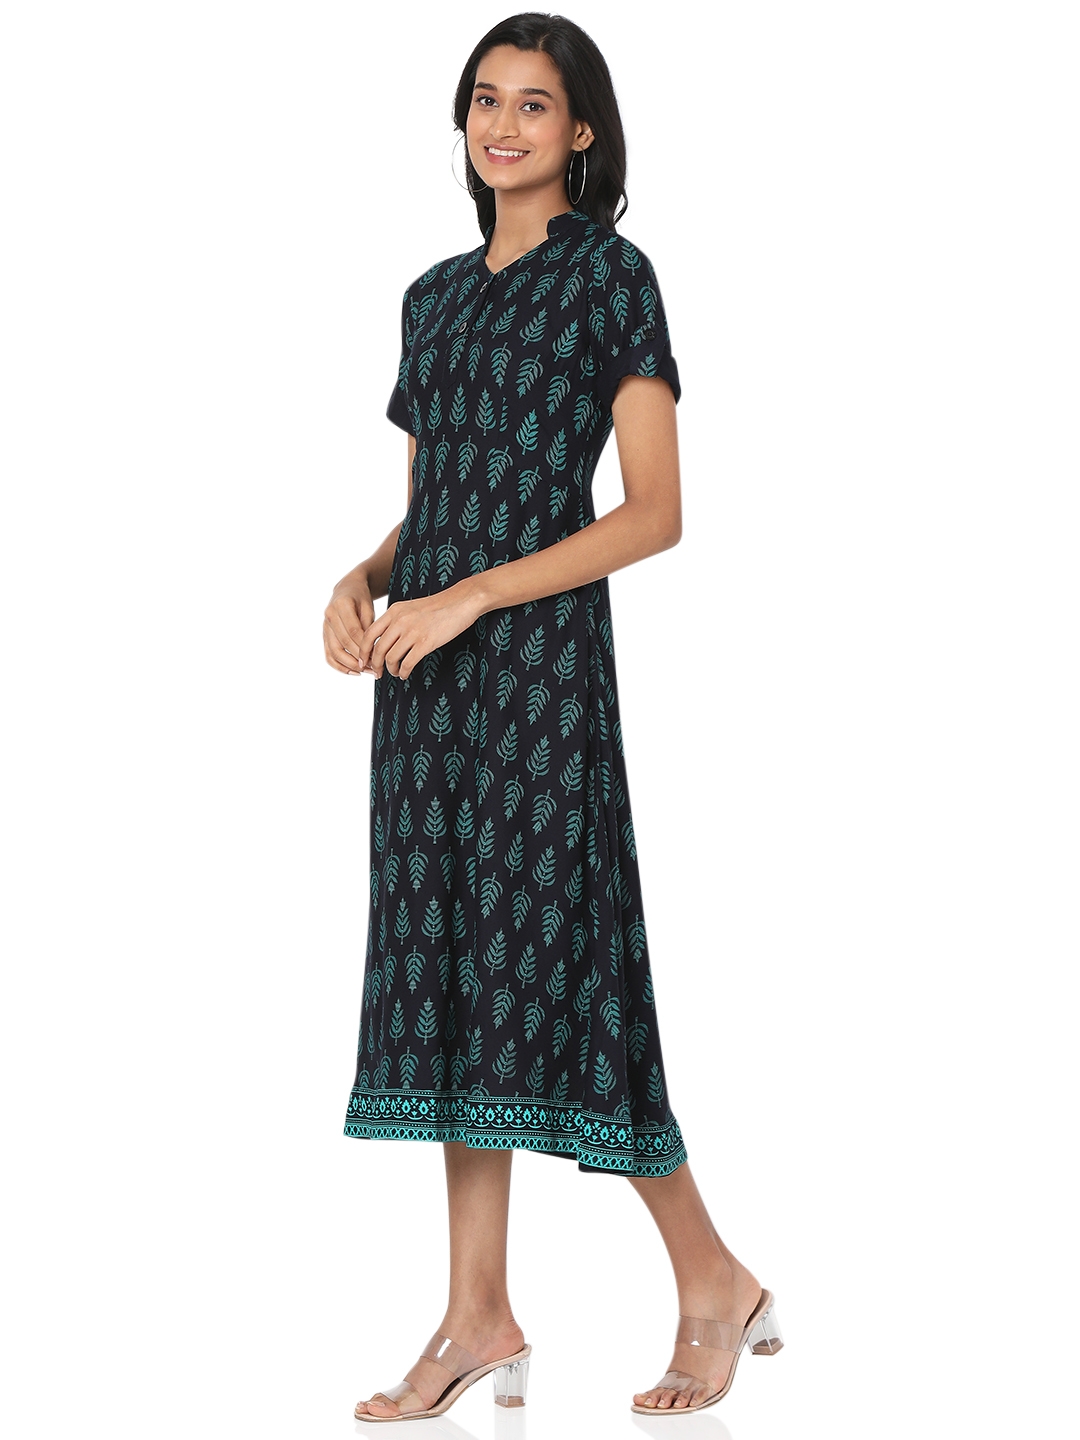 Smarty Pants | Smarty Pants women's cotton fabric green color alpine tree printed dress. 1